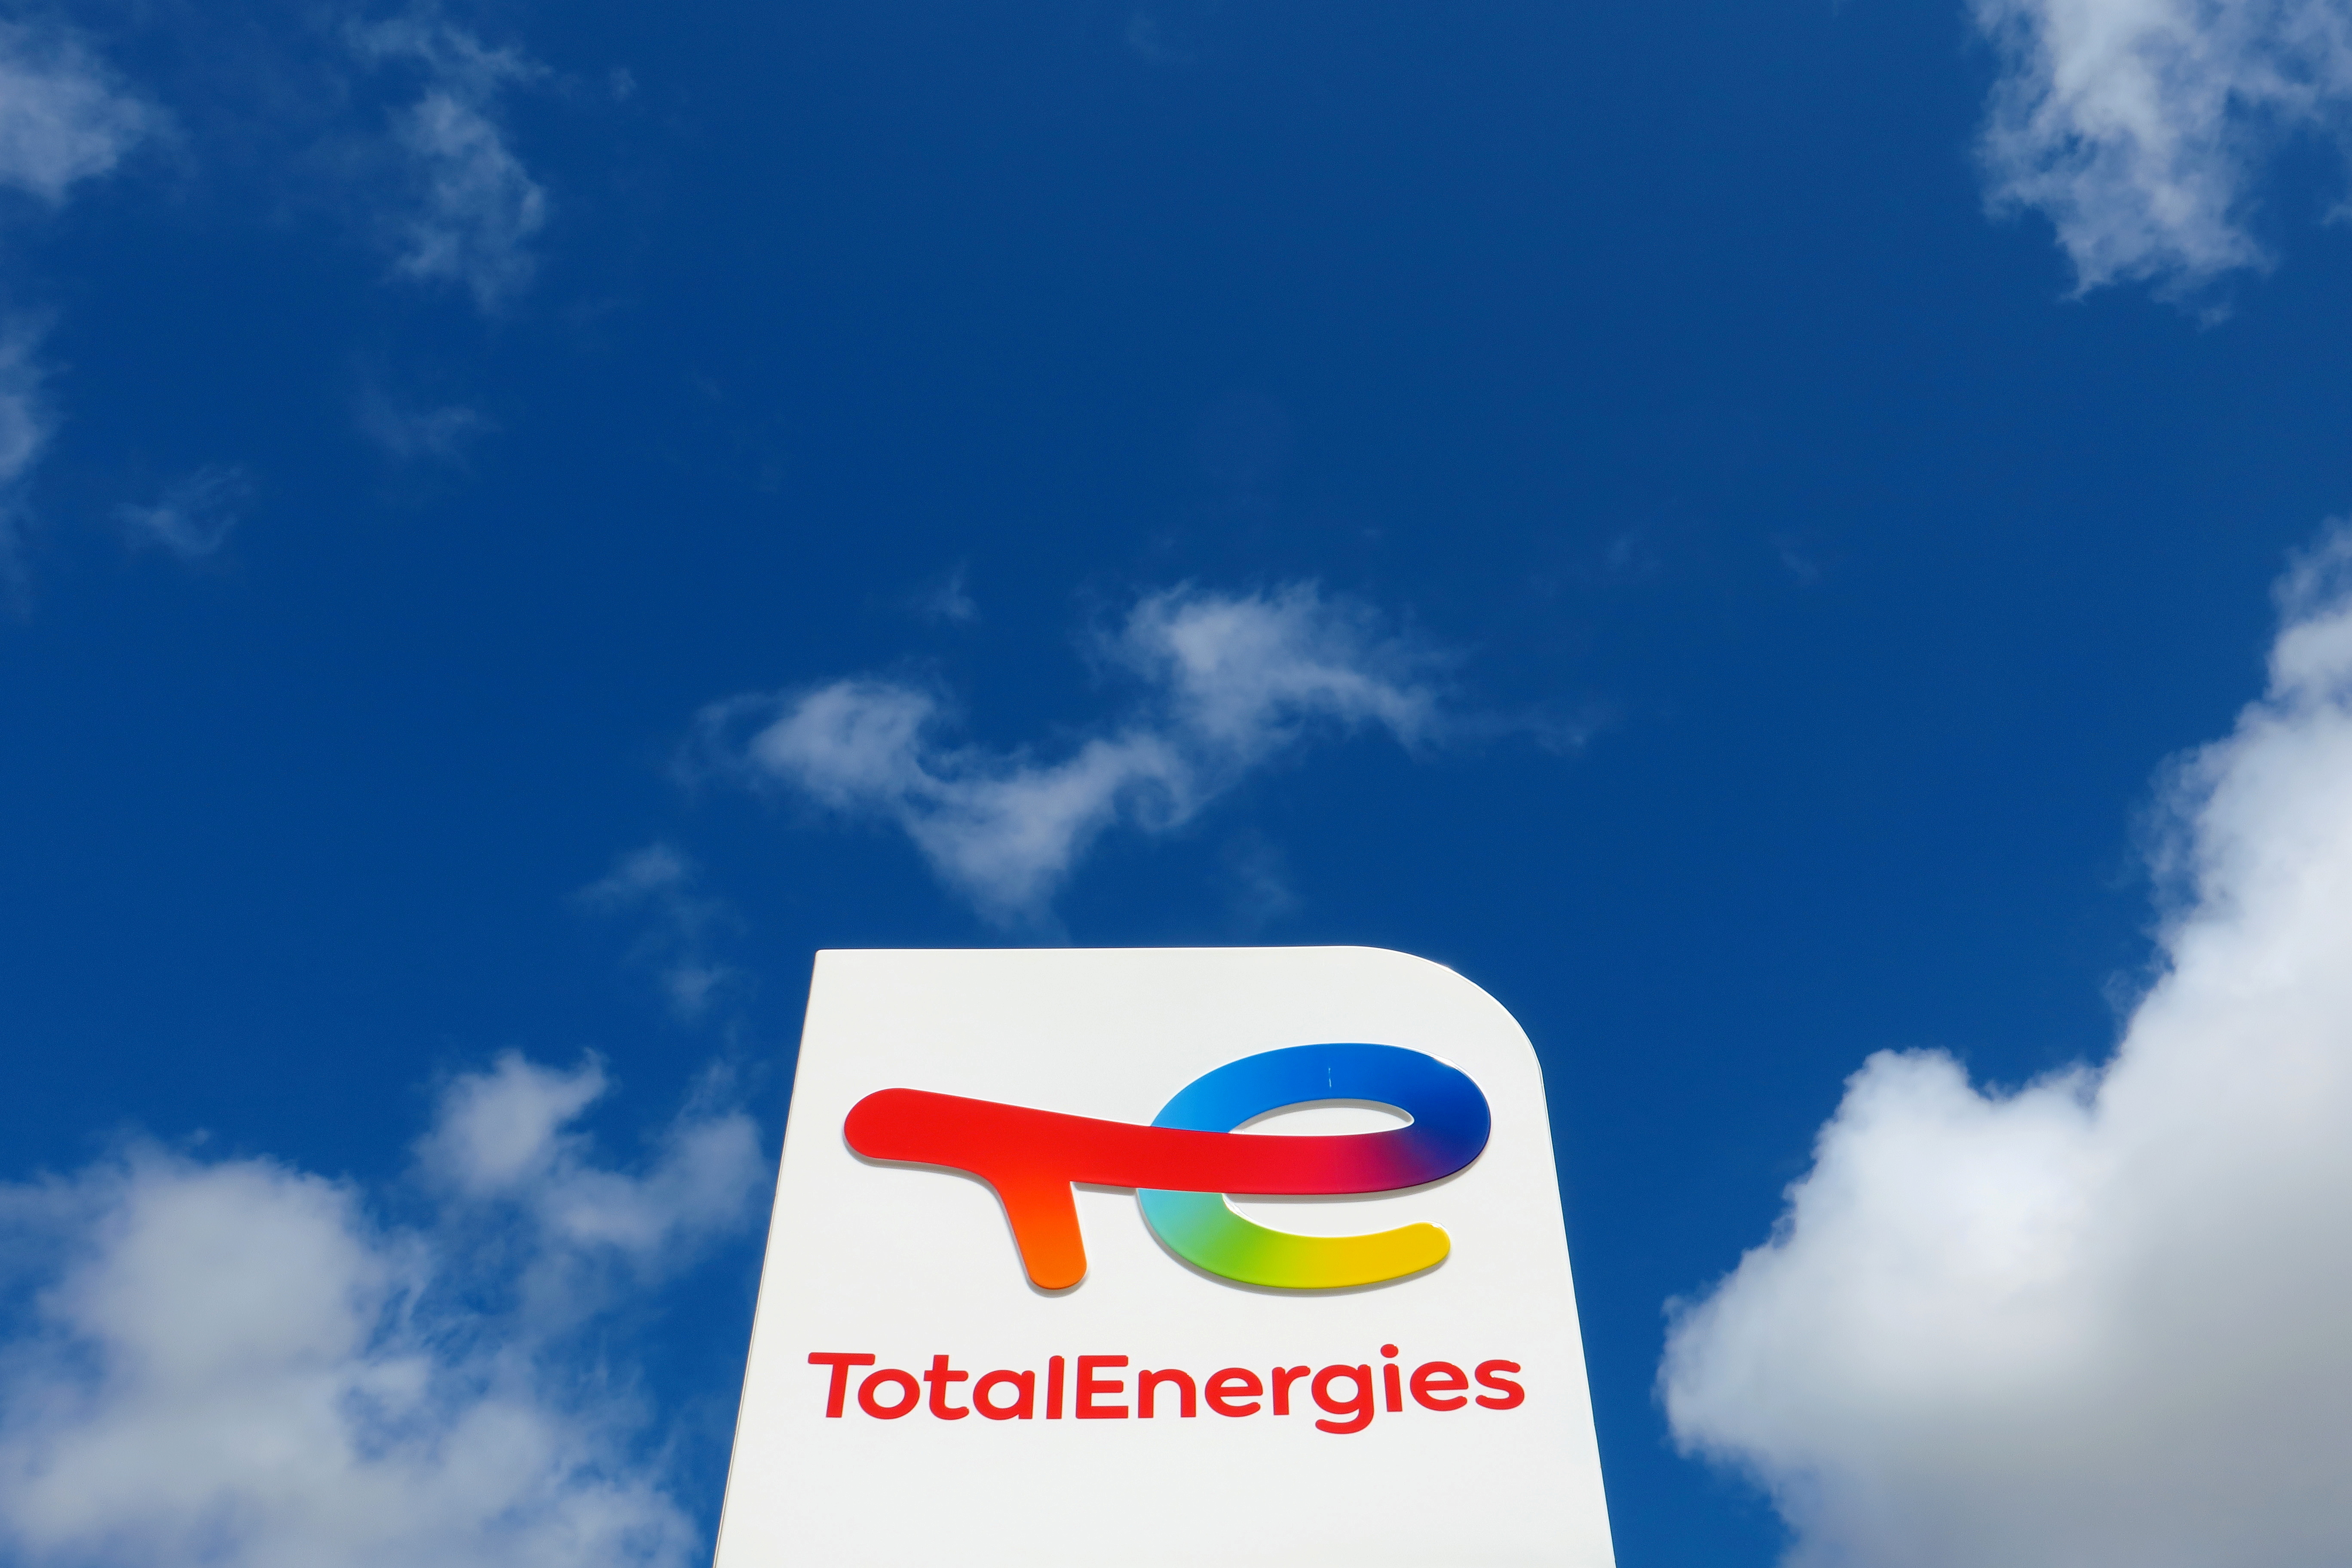 The logo of French oil and gas company TotalEnergies at a petrol station in Ressons